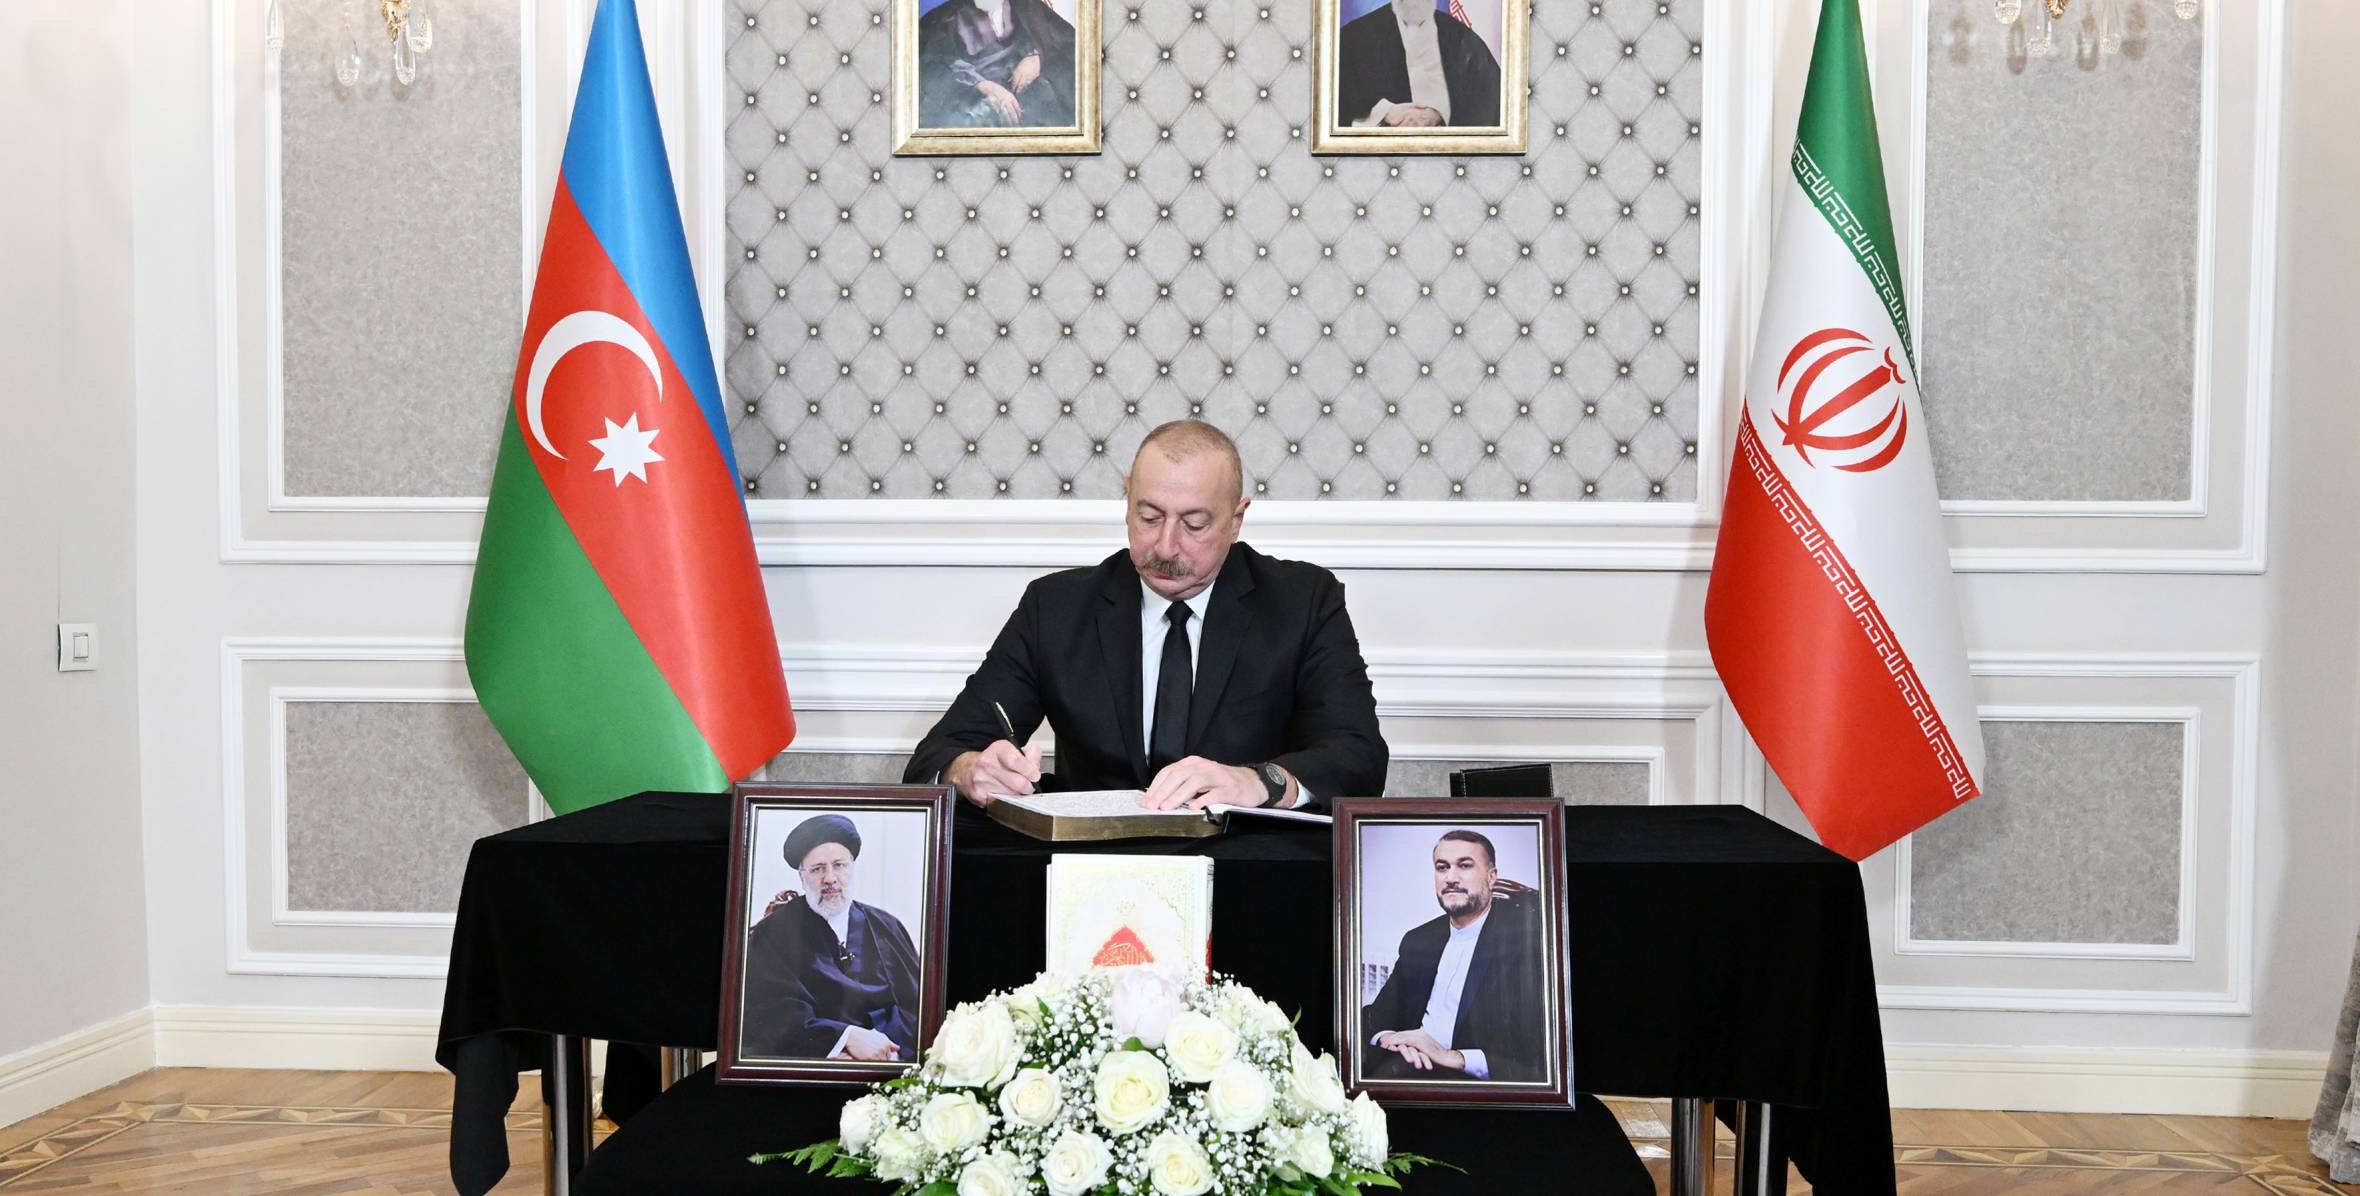 Ilham Aliyev visited Embassy of Iran in Azerbaijan, offered his condolences over the death of the Iranian President and other individuals in helicopter crash